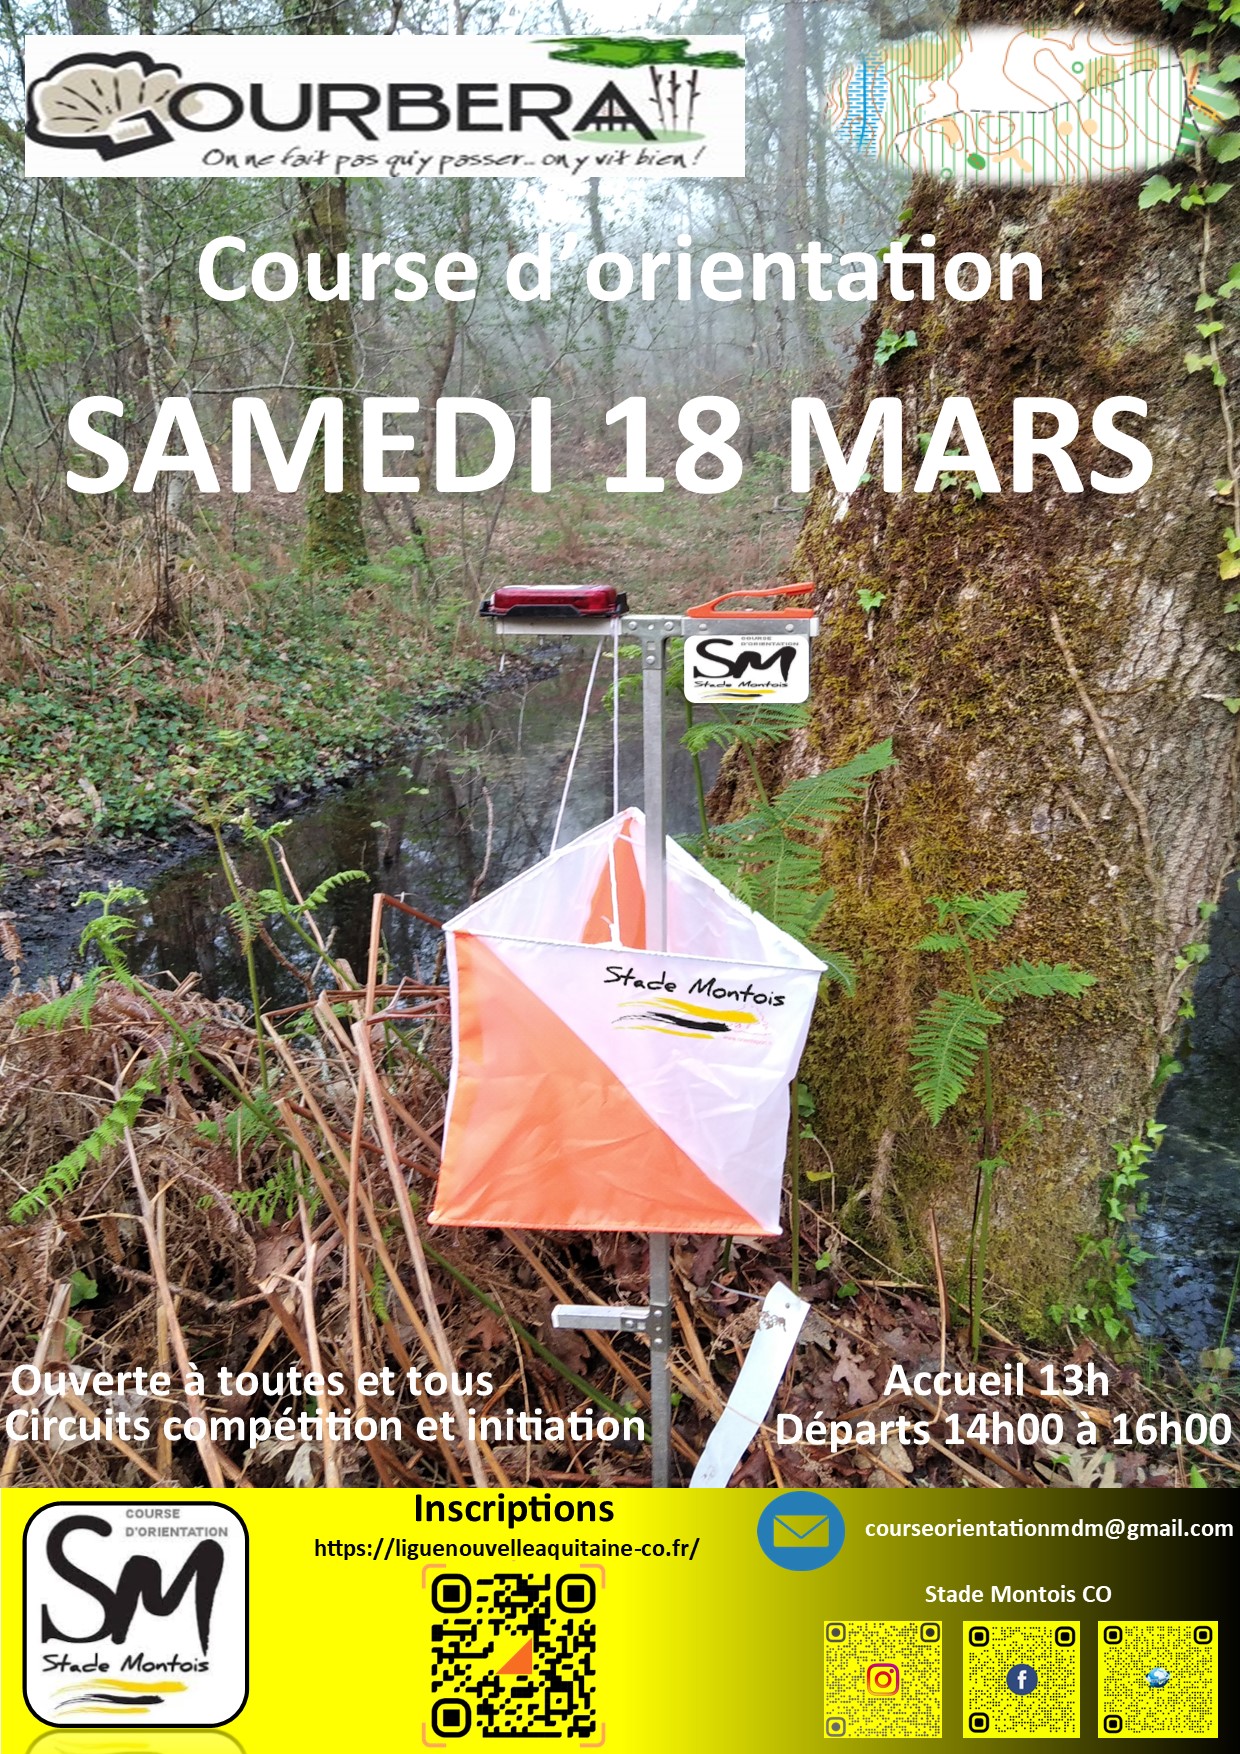 You are currently viewing Le 18 mars, vers Gourbera tu t’orienteras !